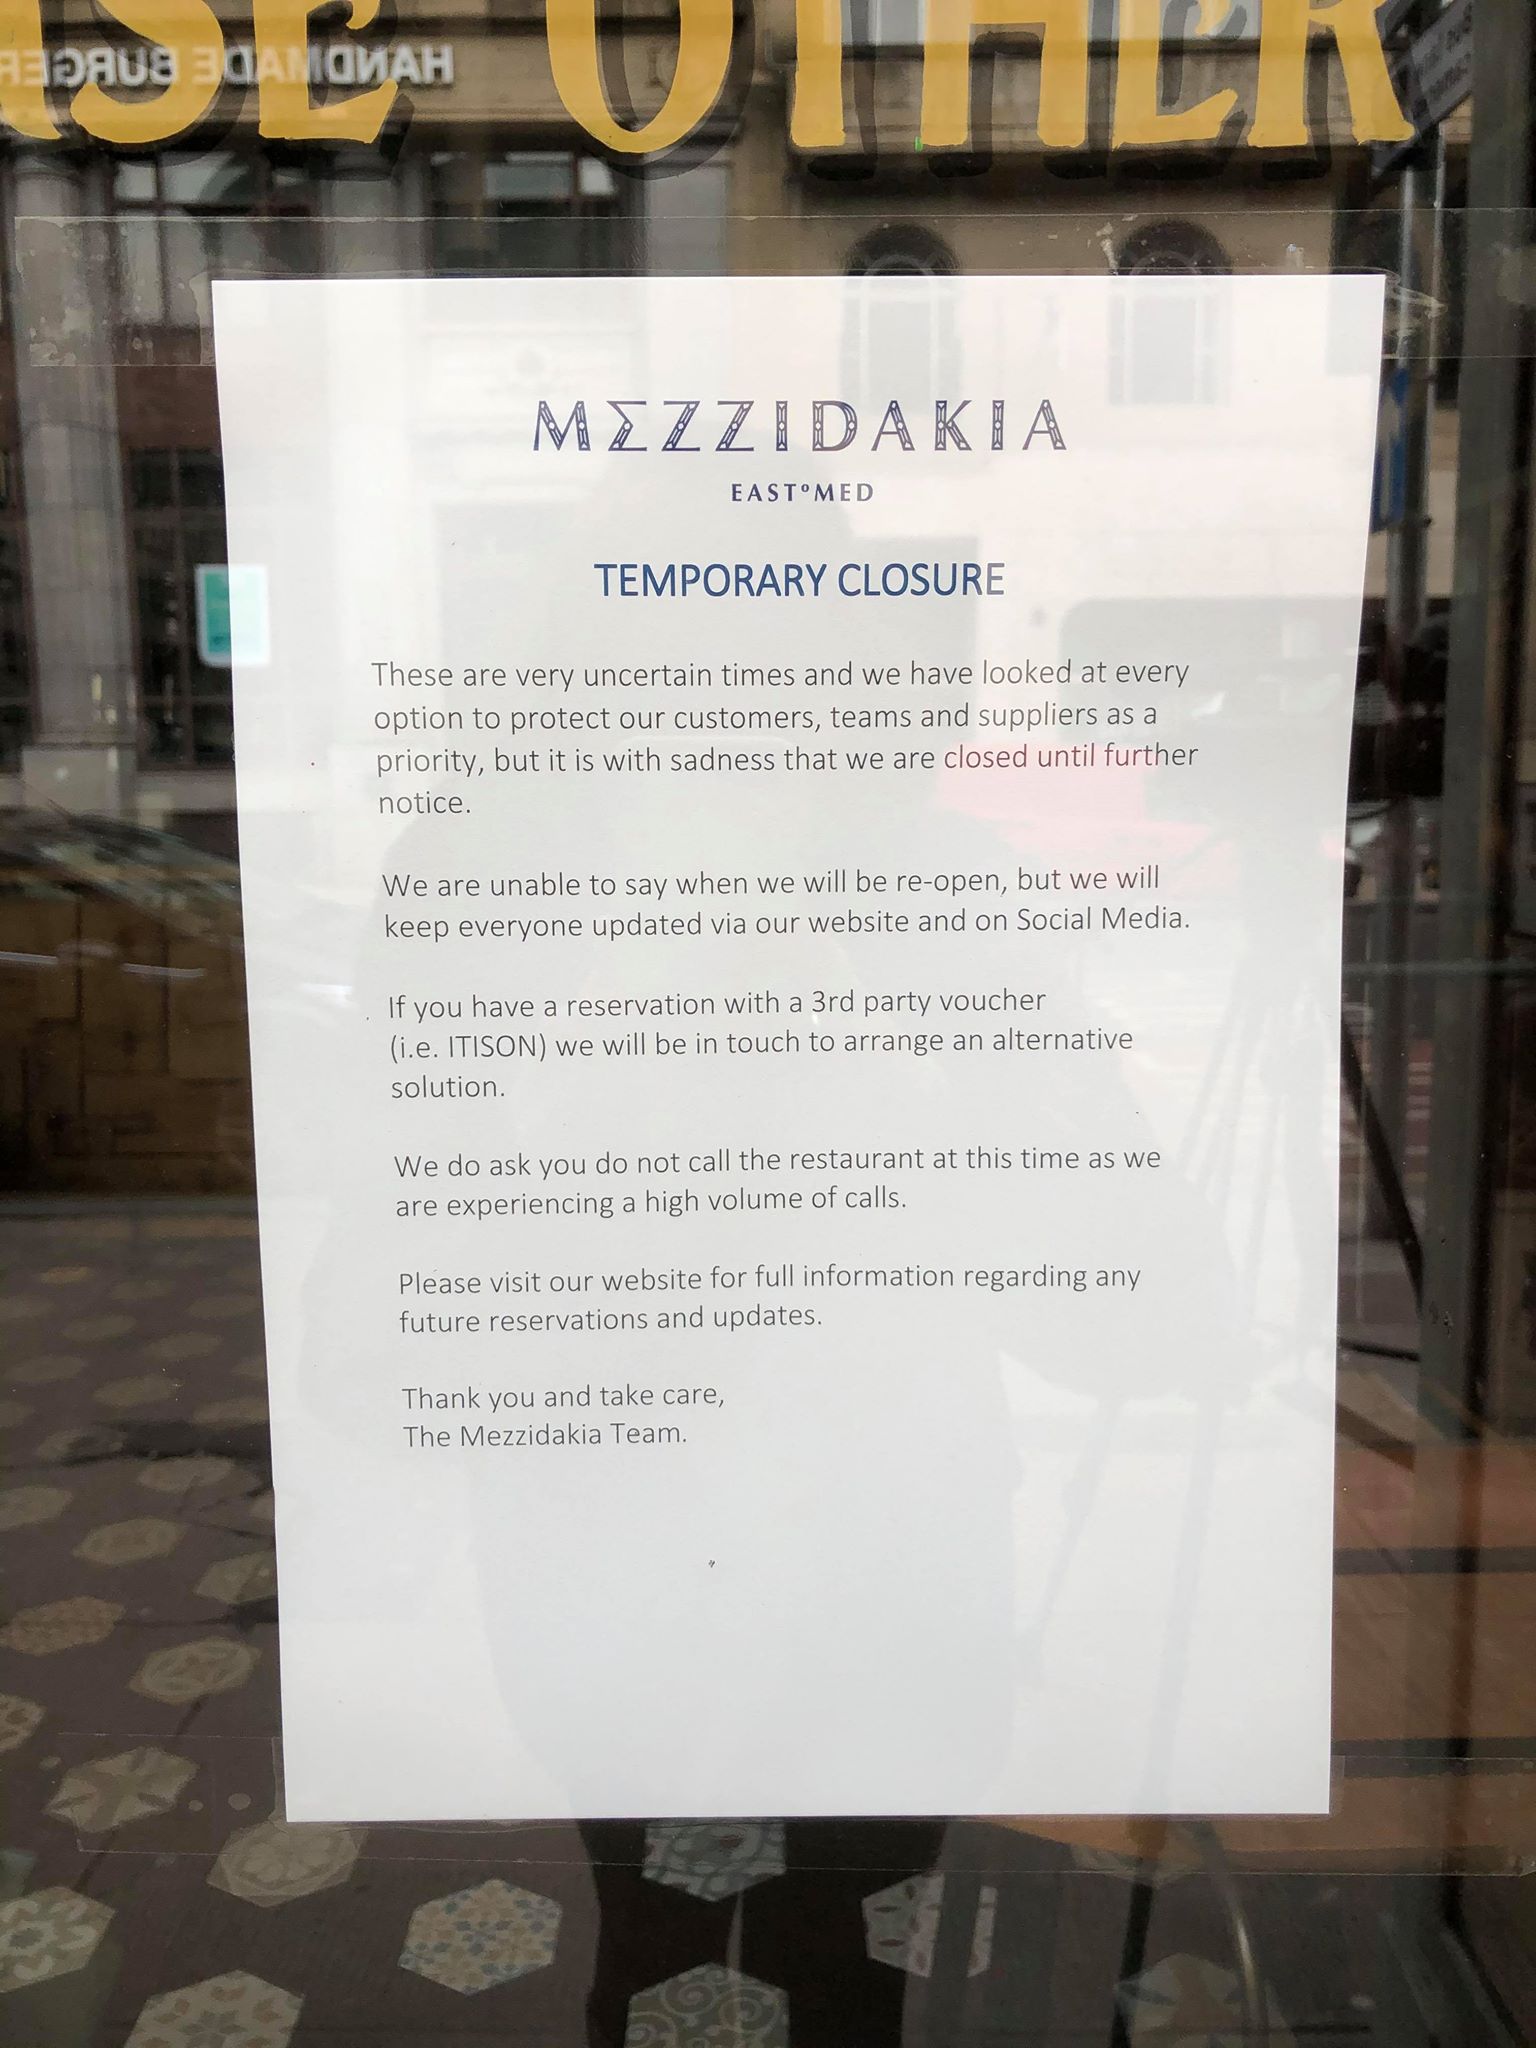 Closure signs could be seen on venue doors across the city.